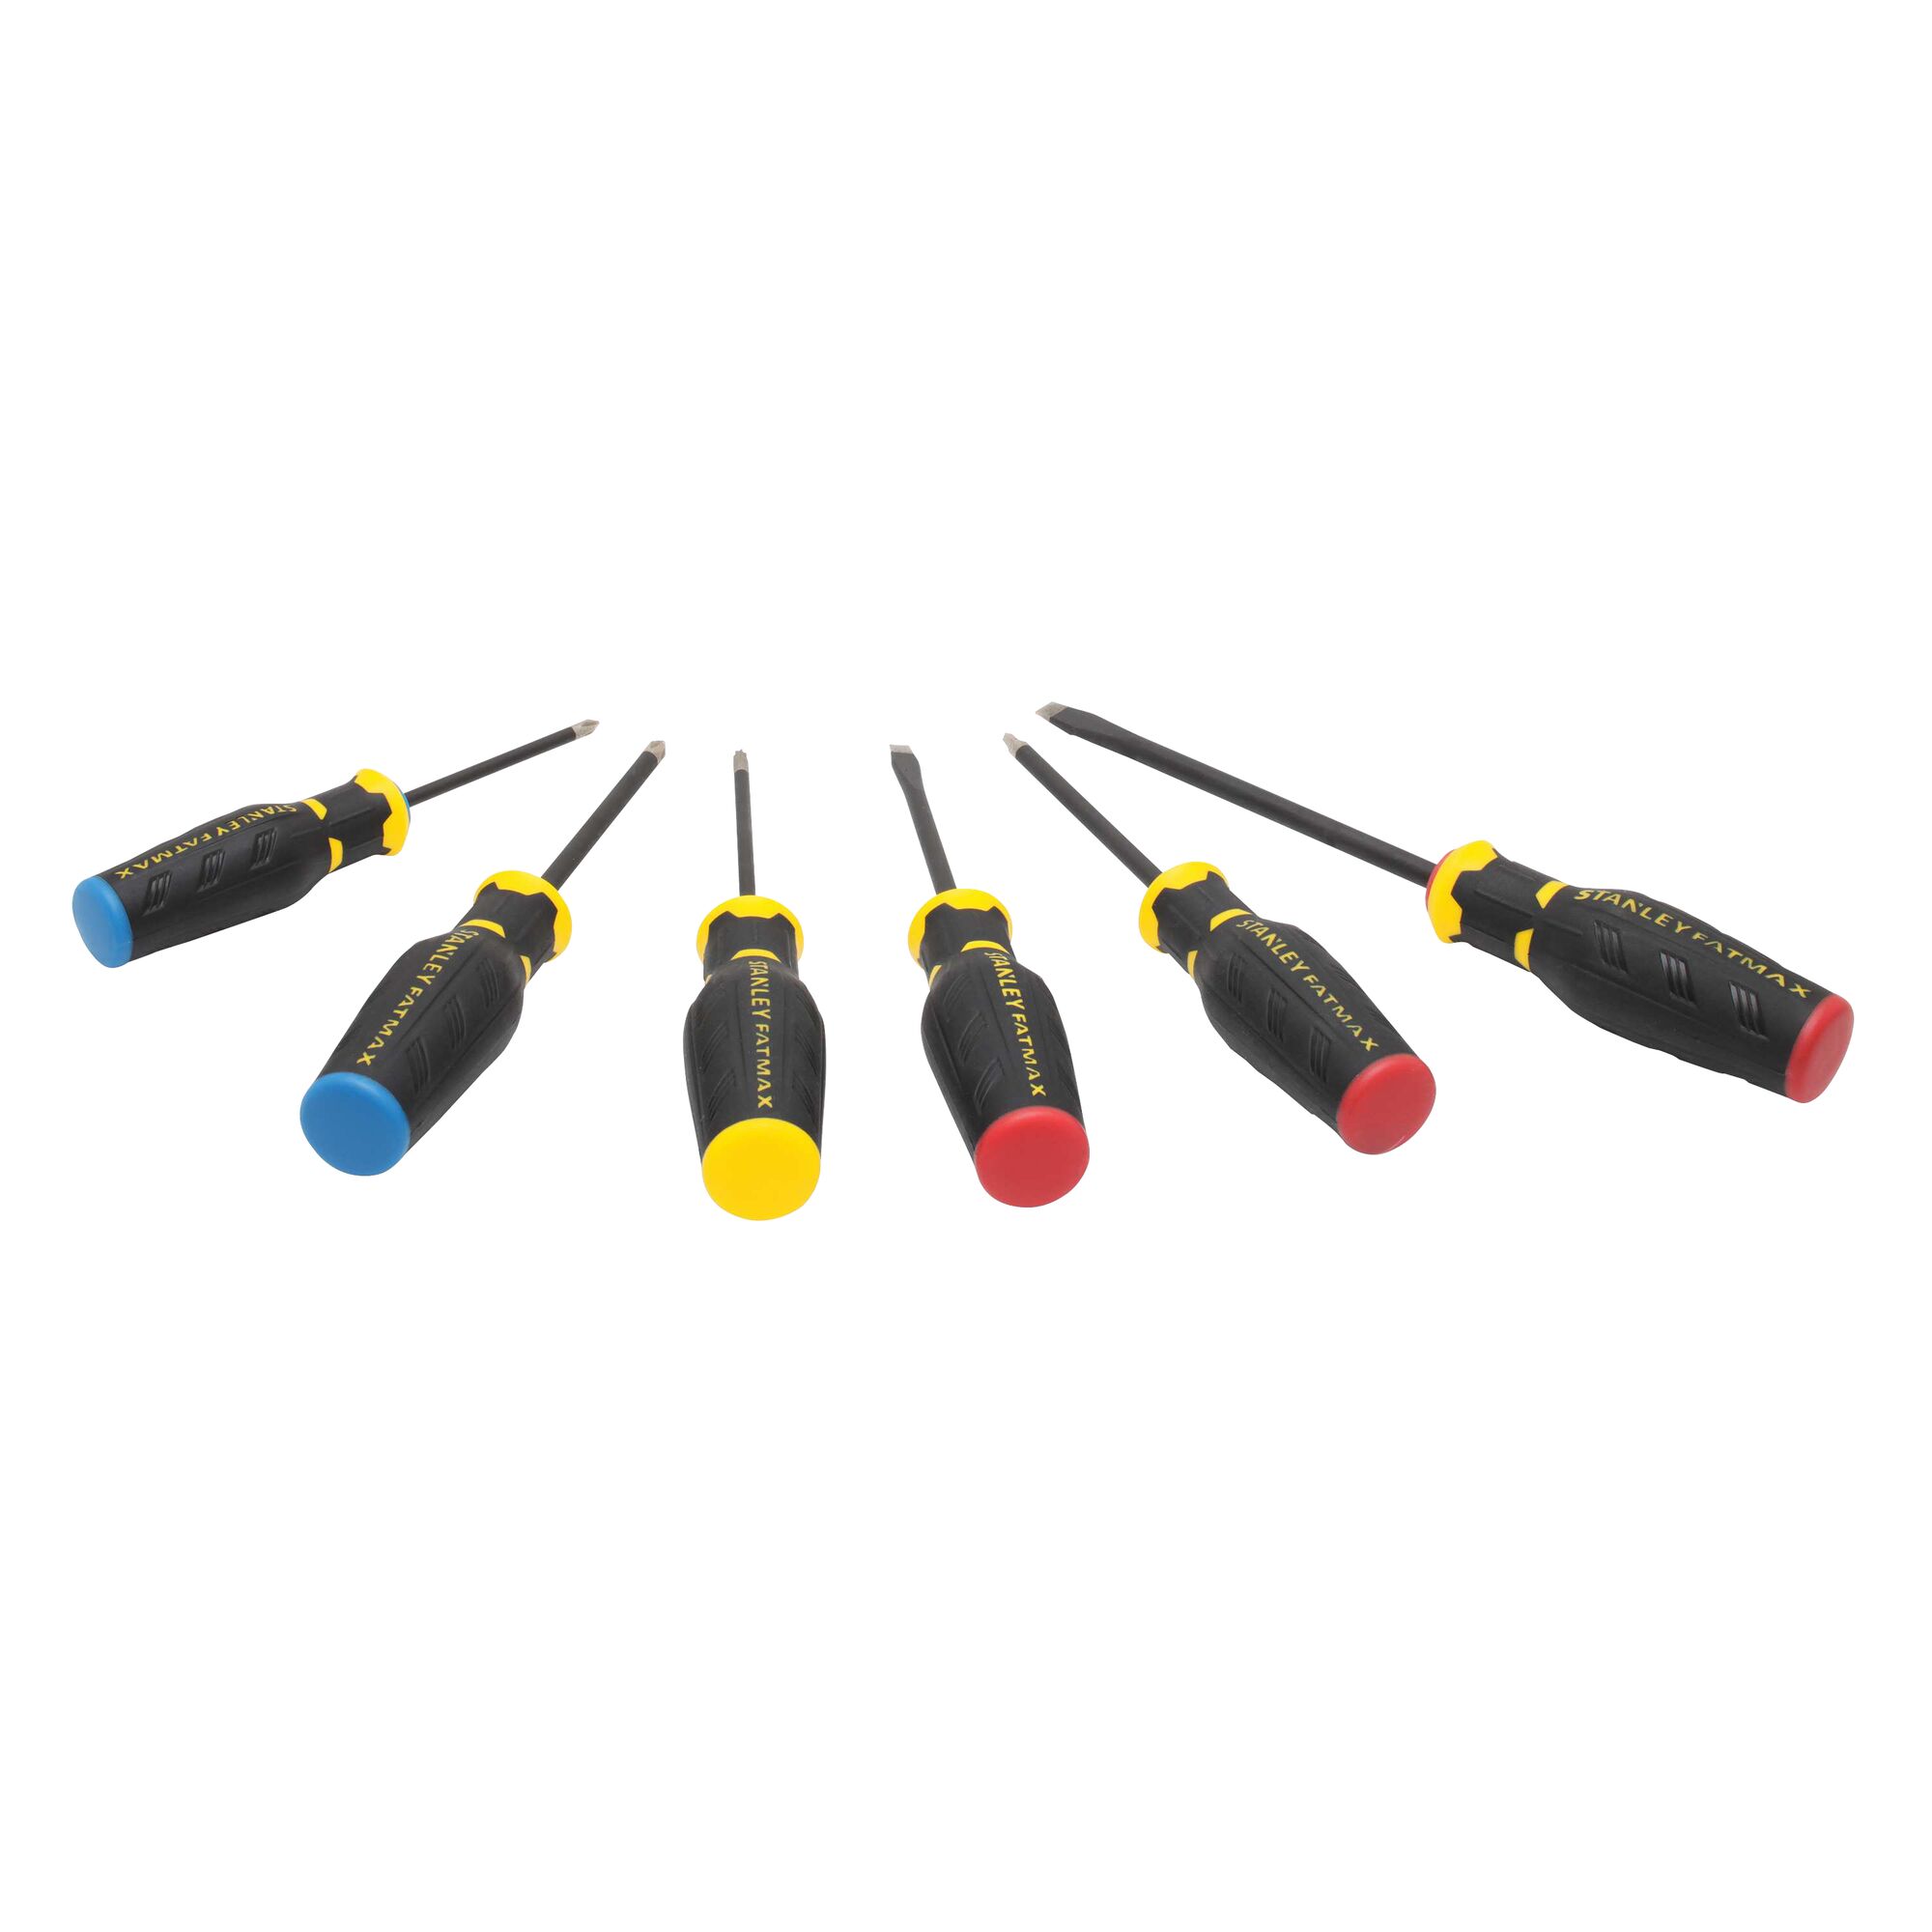 STANLEY® FATMAX® Simulated Diamond Tip 6 pc Screwdriver Set | STANLEY